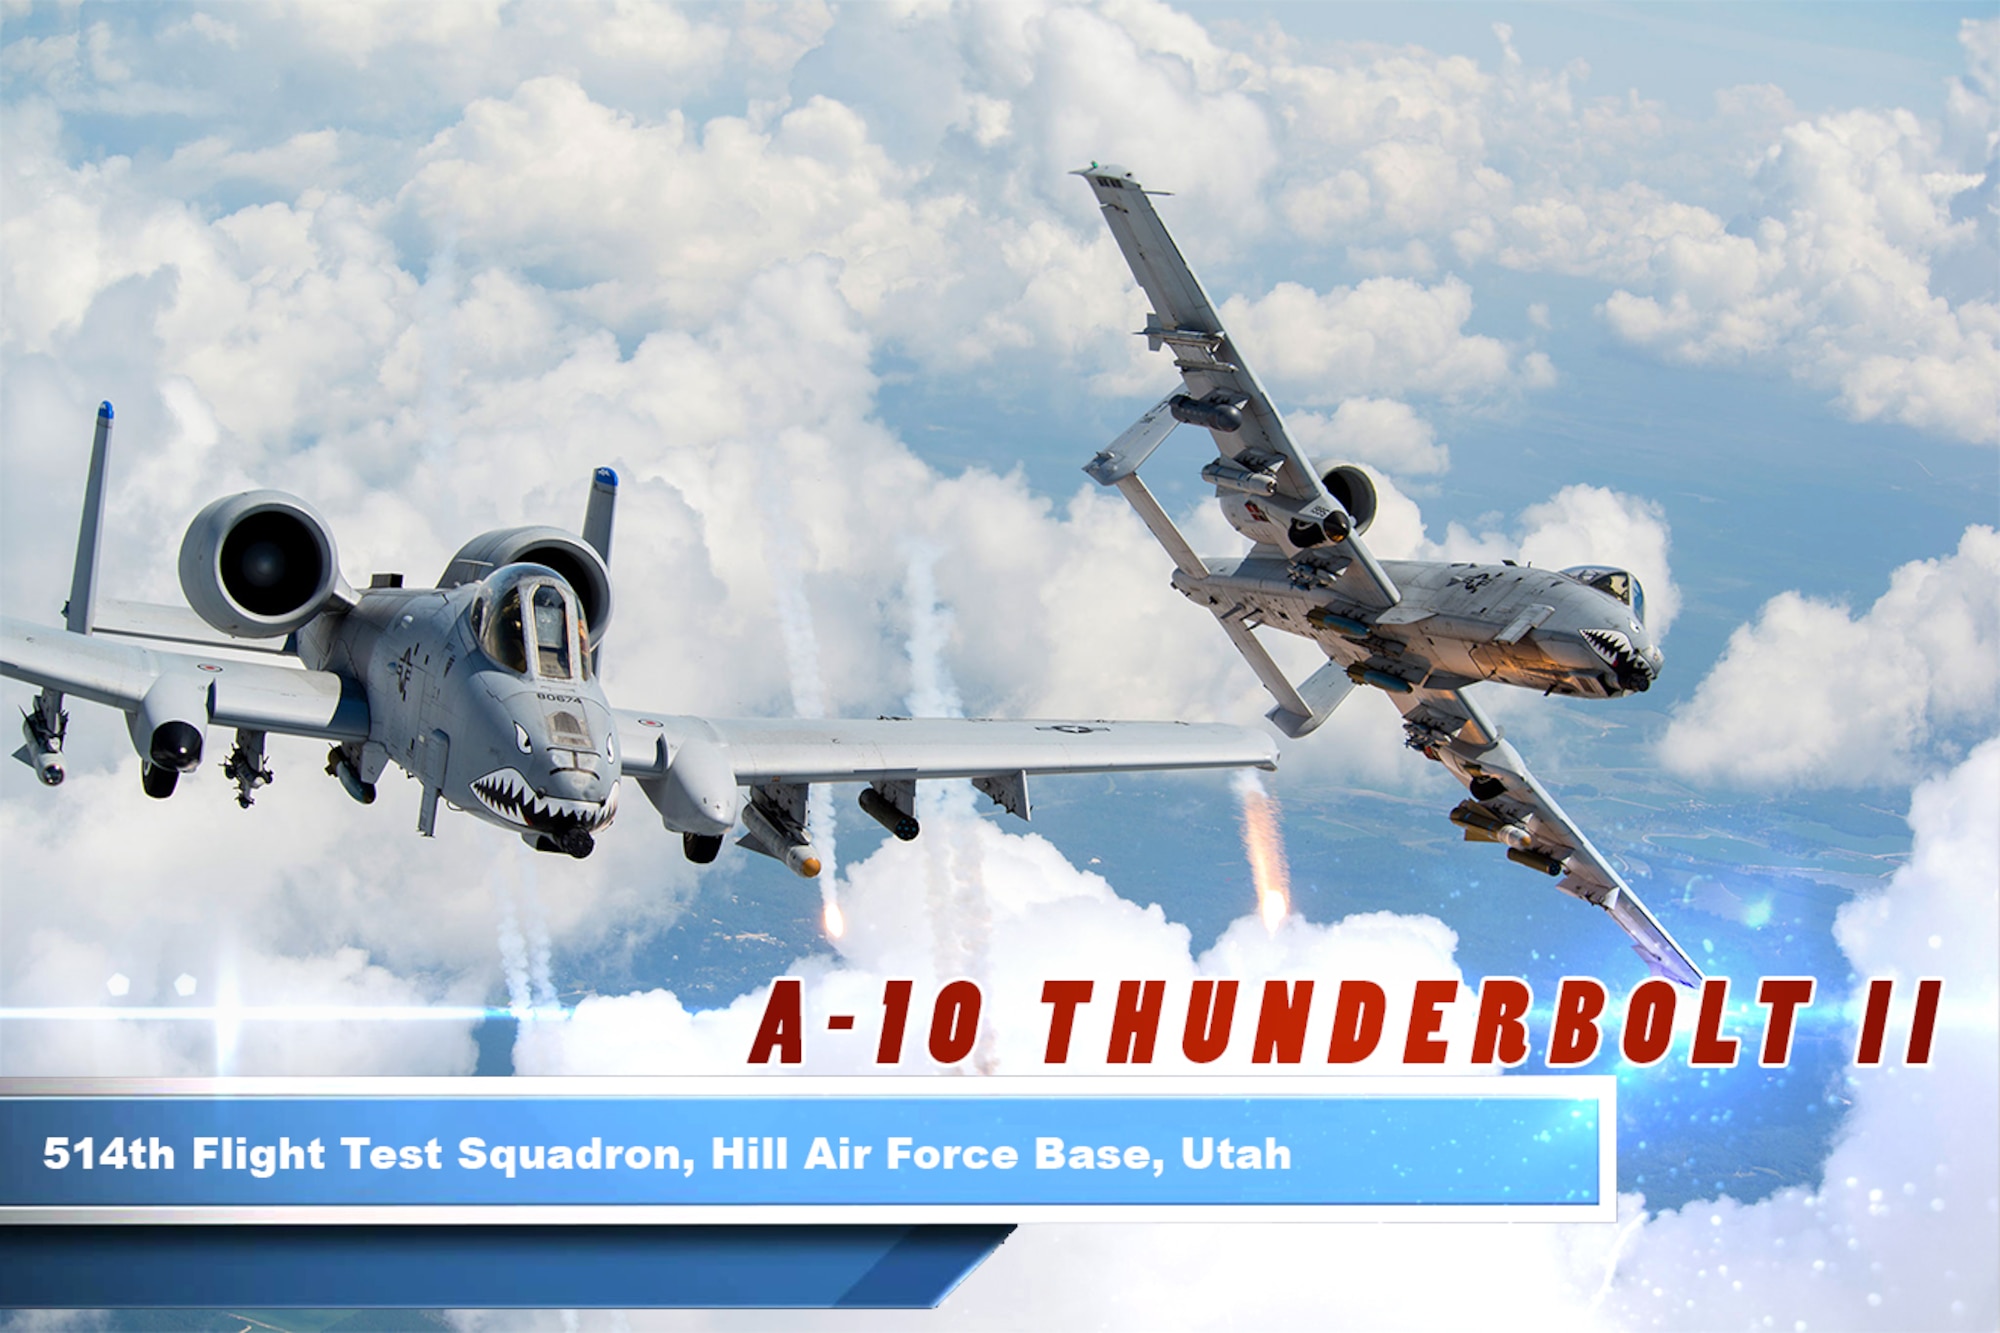 The A-10 Thunderbolt II has excellent maneuverability at low air speeds and altitude, and is a highly accurate and survivable weapons-delivery platform. The aircraft can loiter near battle areas for extended periods of time and operate in low ceiling and visibility conditions. The wide combat radius and short takeoff and landing capability permit operations in and out of locations near front lines. Using night vision goggles, A-10 pilots can conduct their missions during darkness.